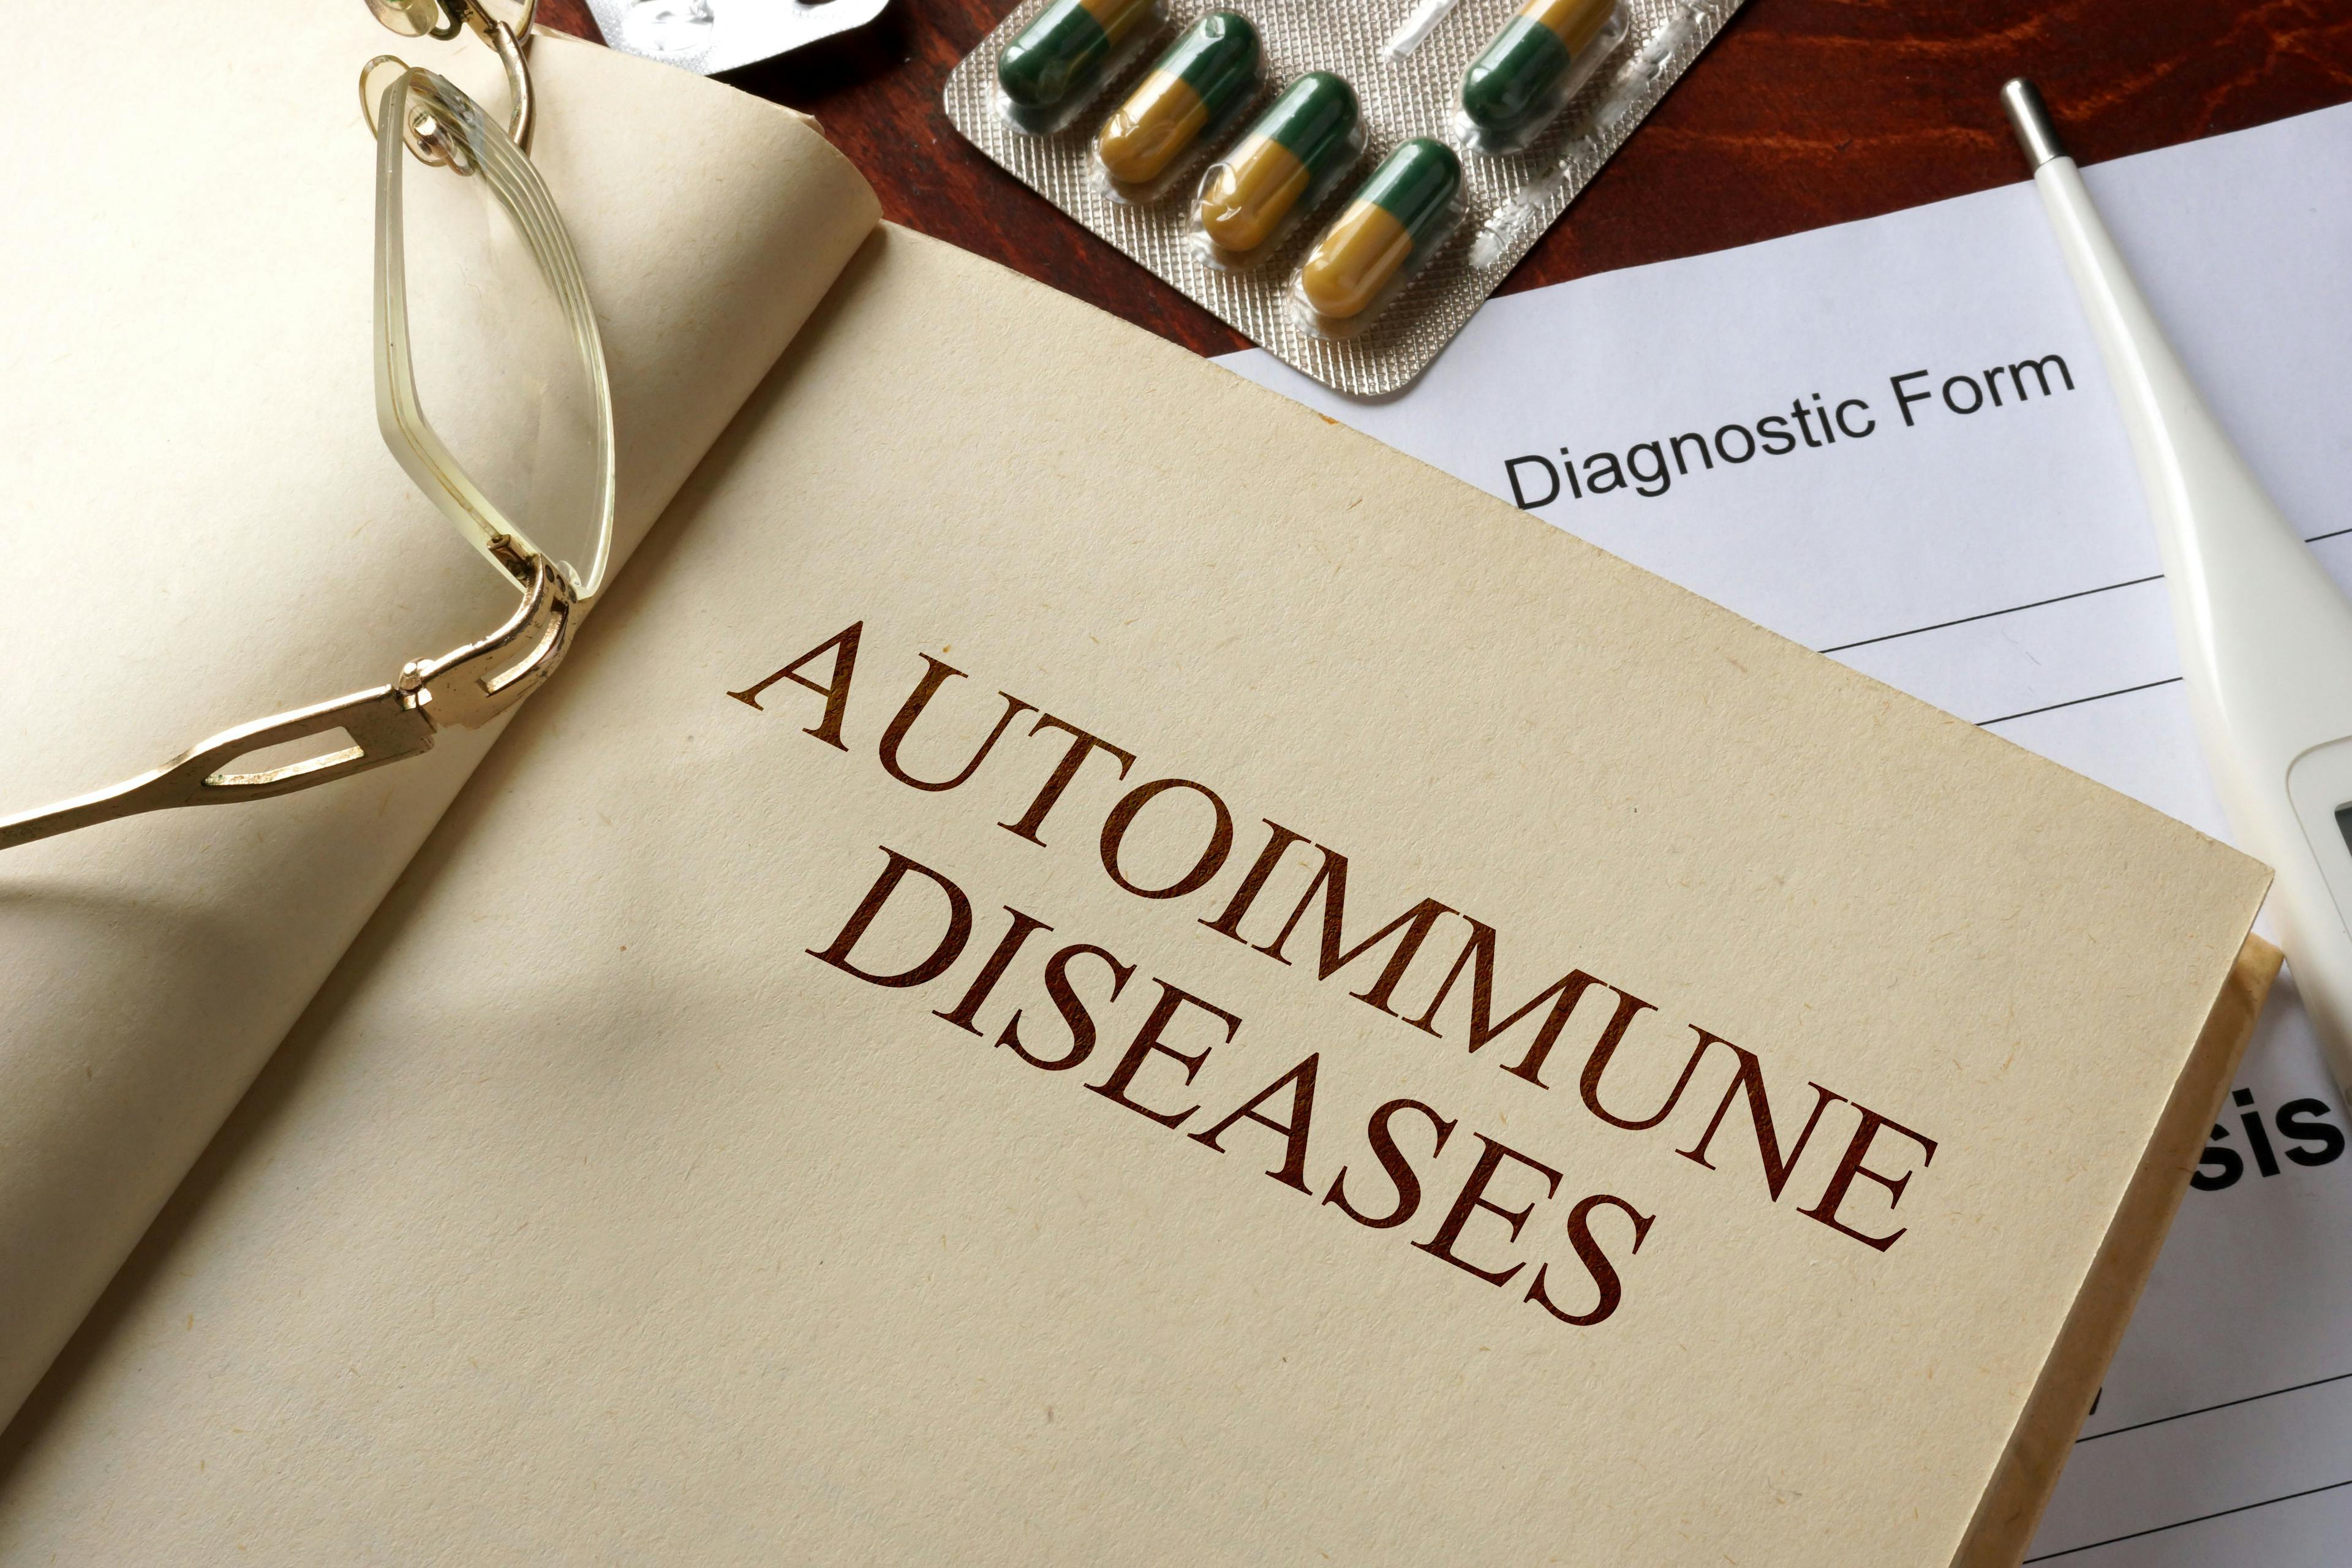   Early Peresolimab Data Could Signal Change in Treatment for RA, Other Autoimmune Diseases